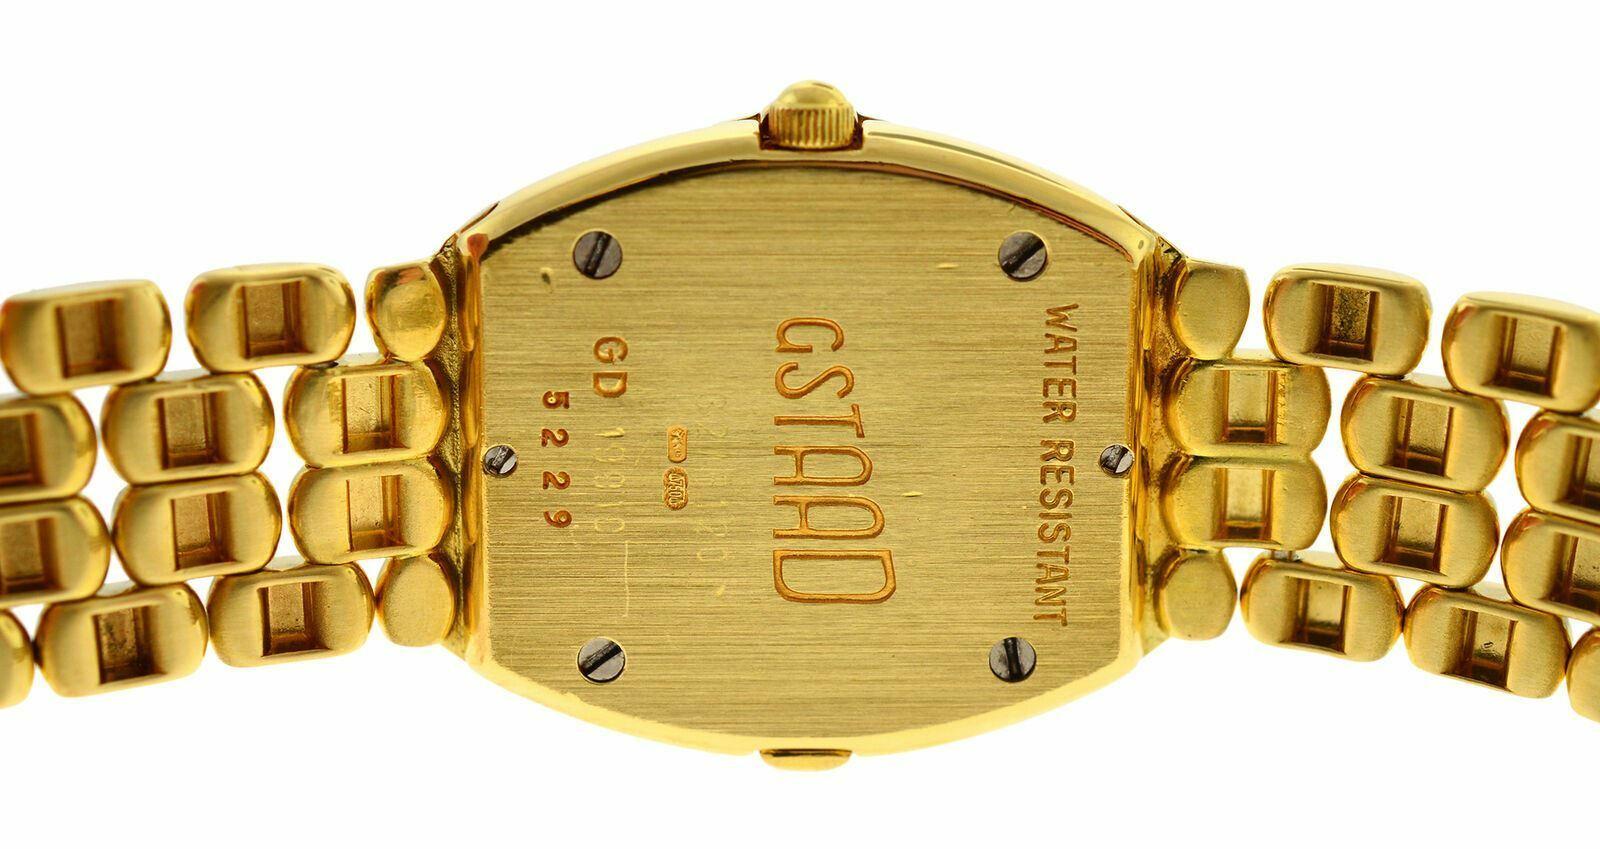 Ladies Chopard Gstaad Quartz 18 Karat Yellow Gold Watch In Excellent Condition For Sale In New York, NY